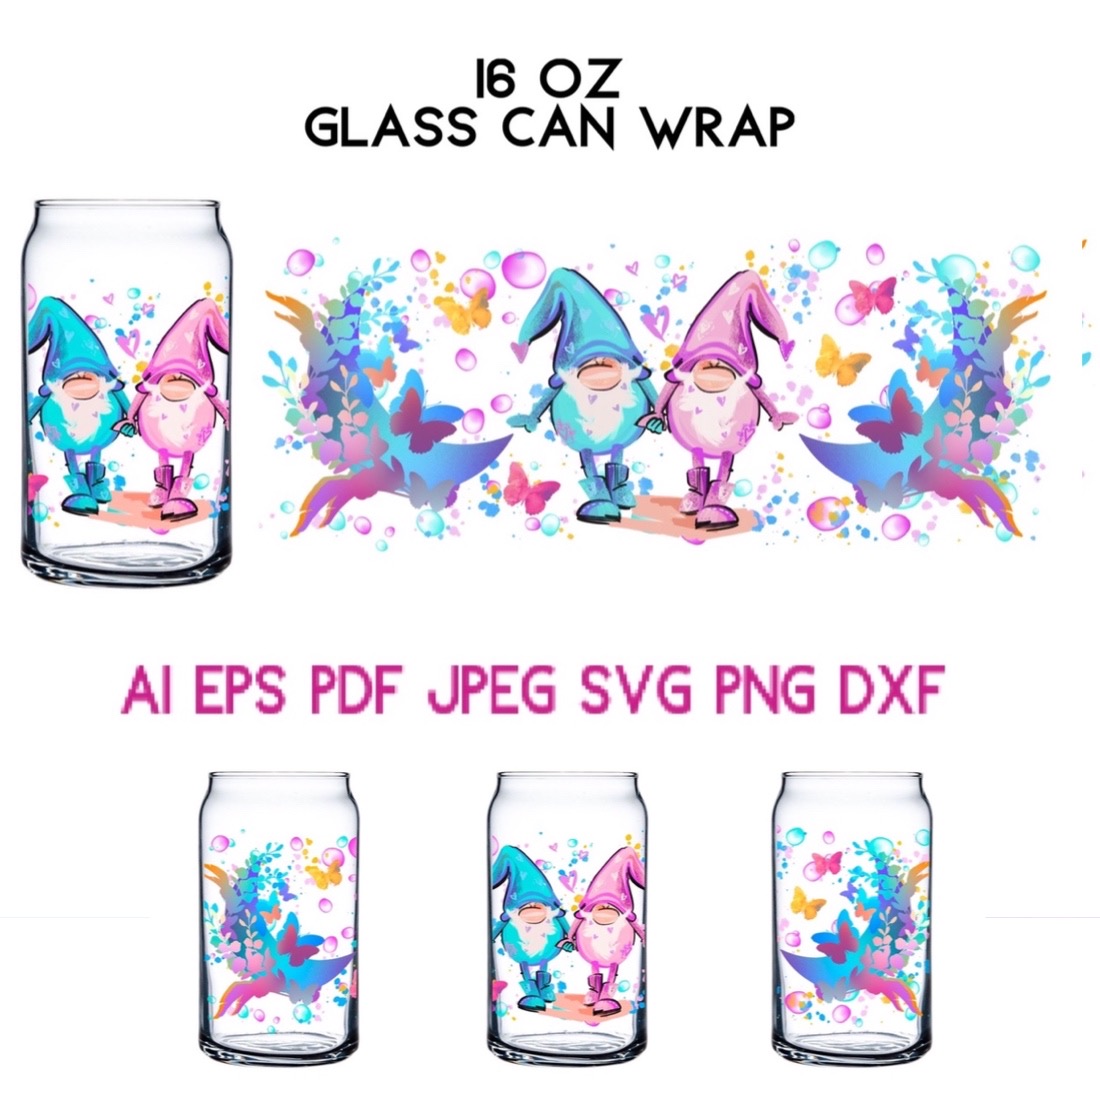 16 oz Glass Can Wrap Gnomes Holiday Birthday Valentines Day cover image.